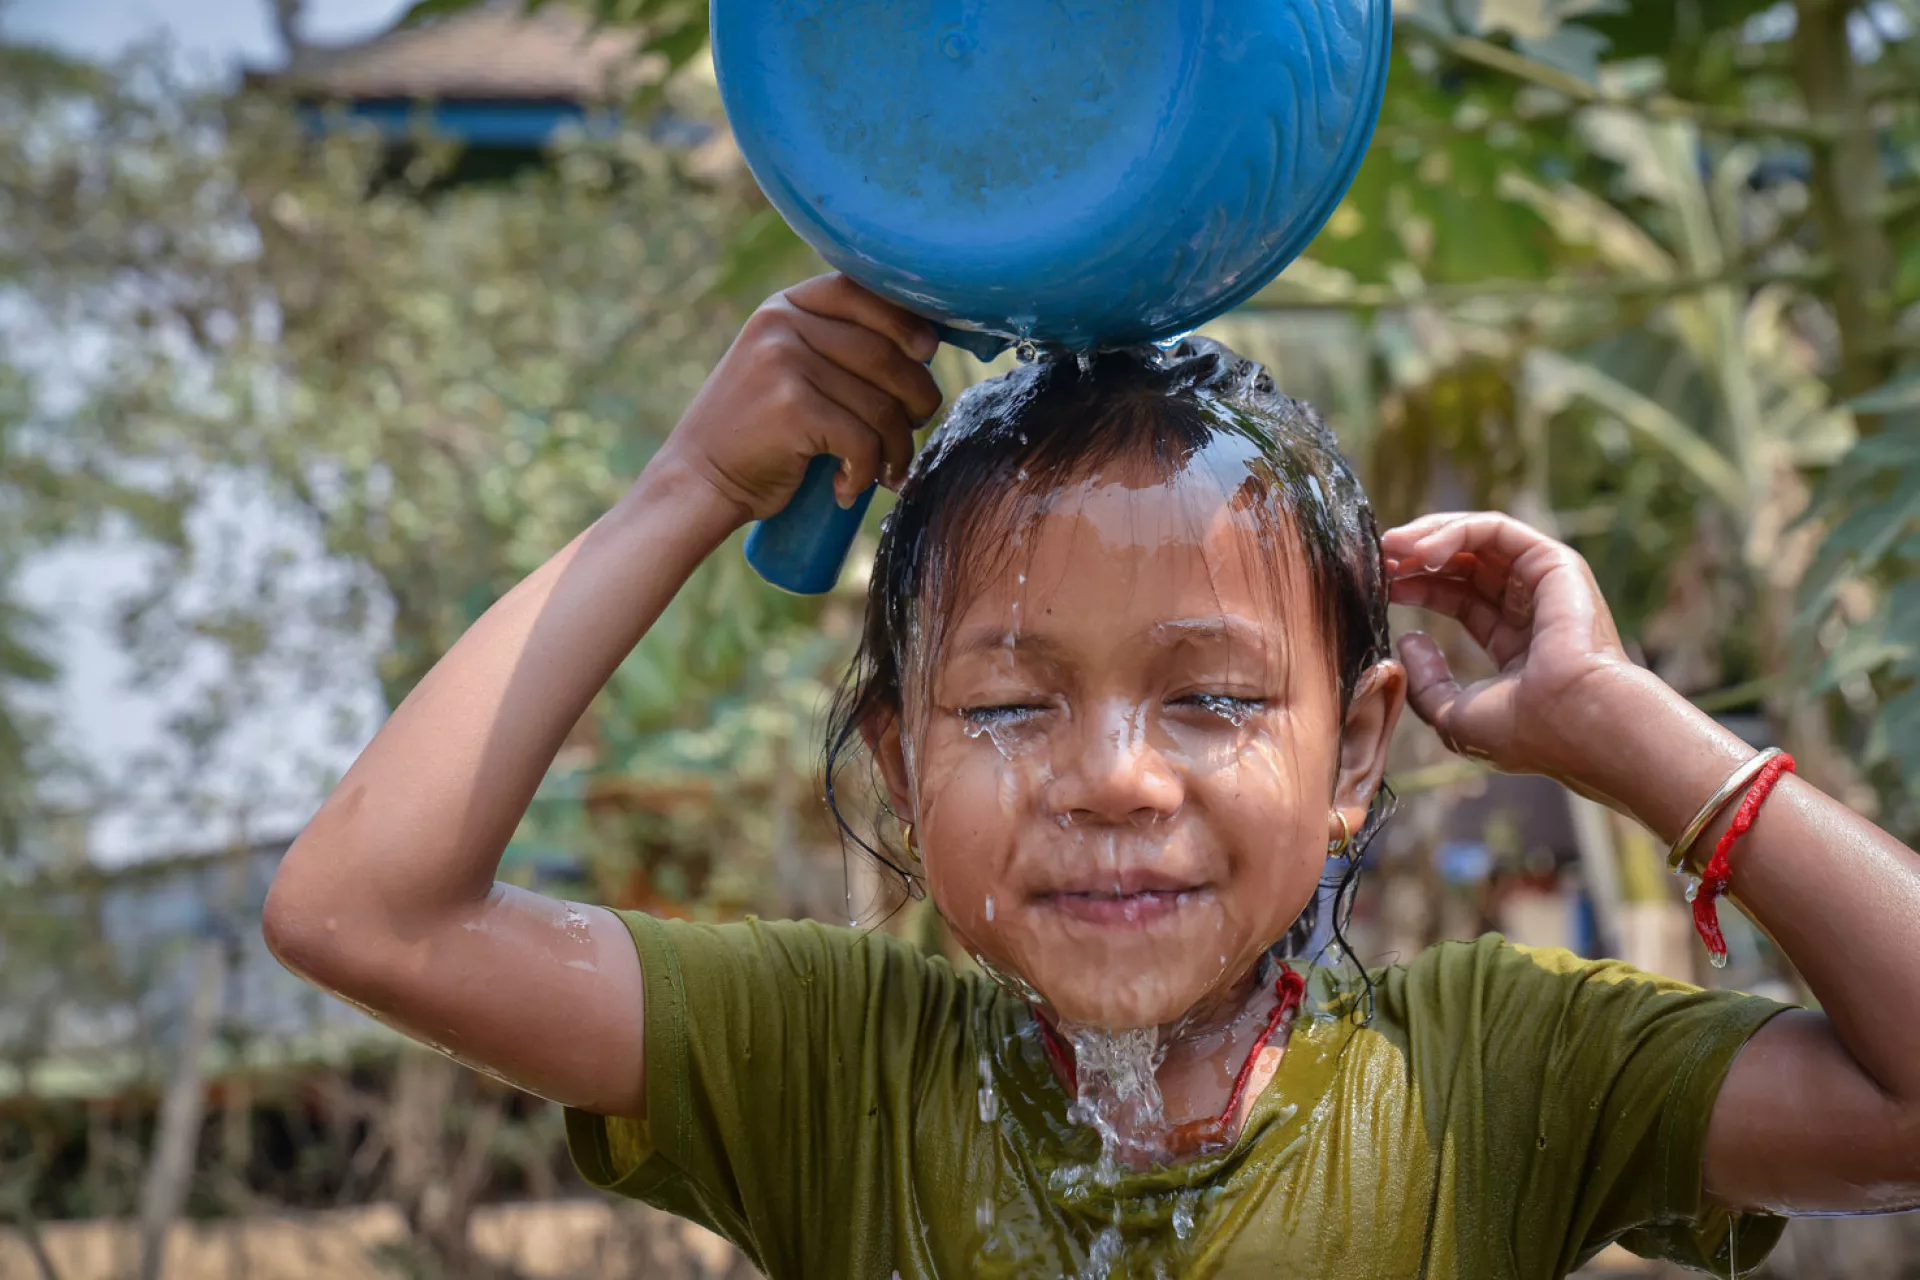 In Cambodia, Mara, 5, uses a cooking pot for her shower after school. 